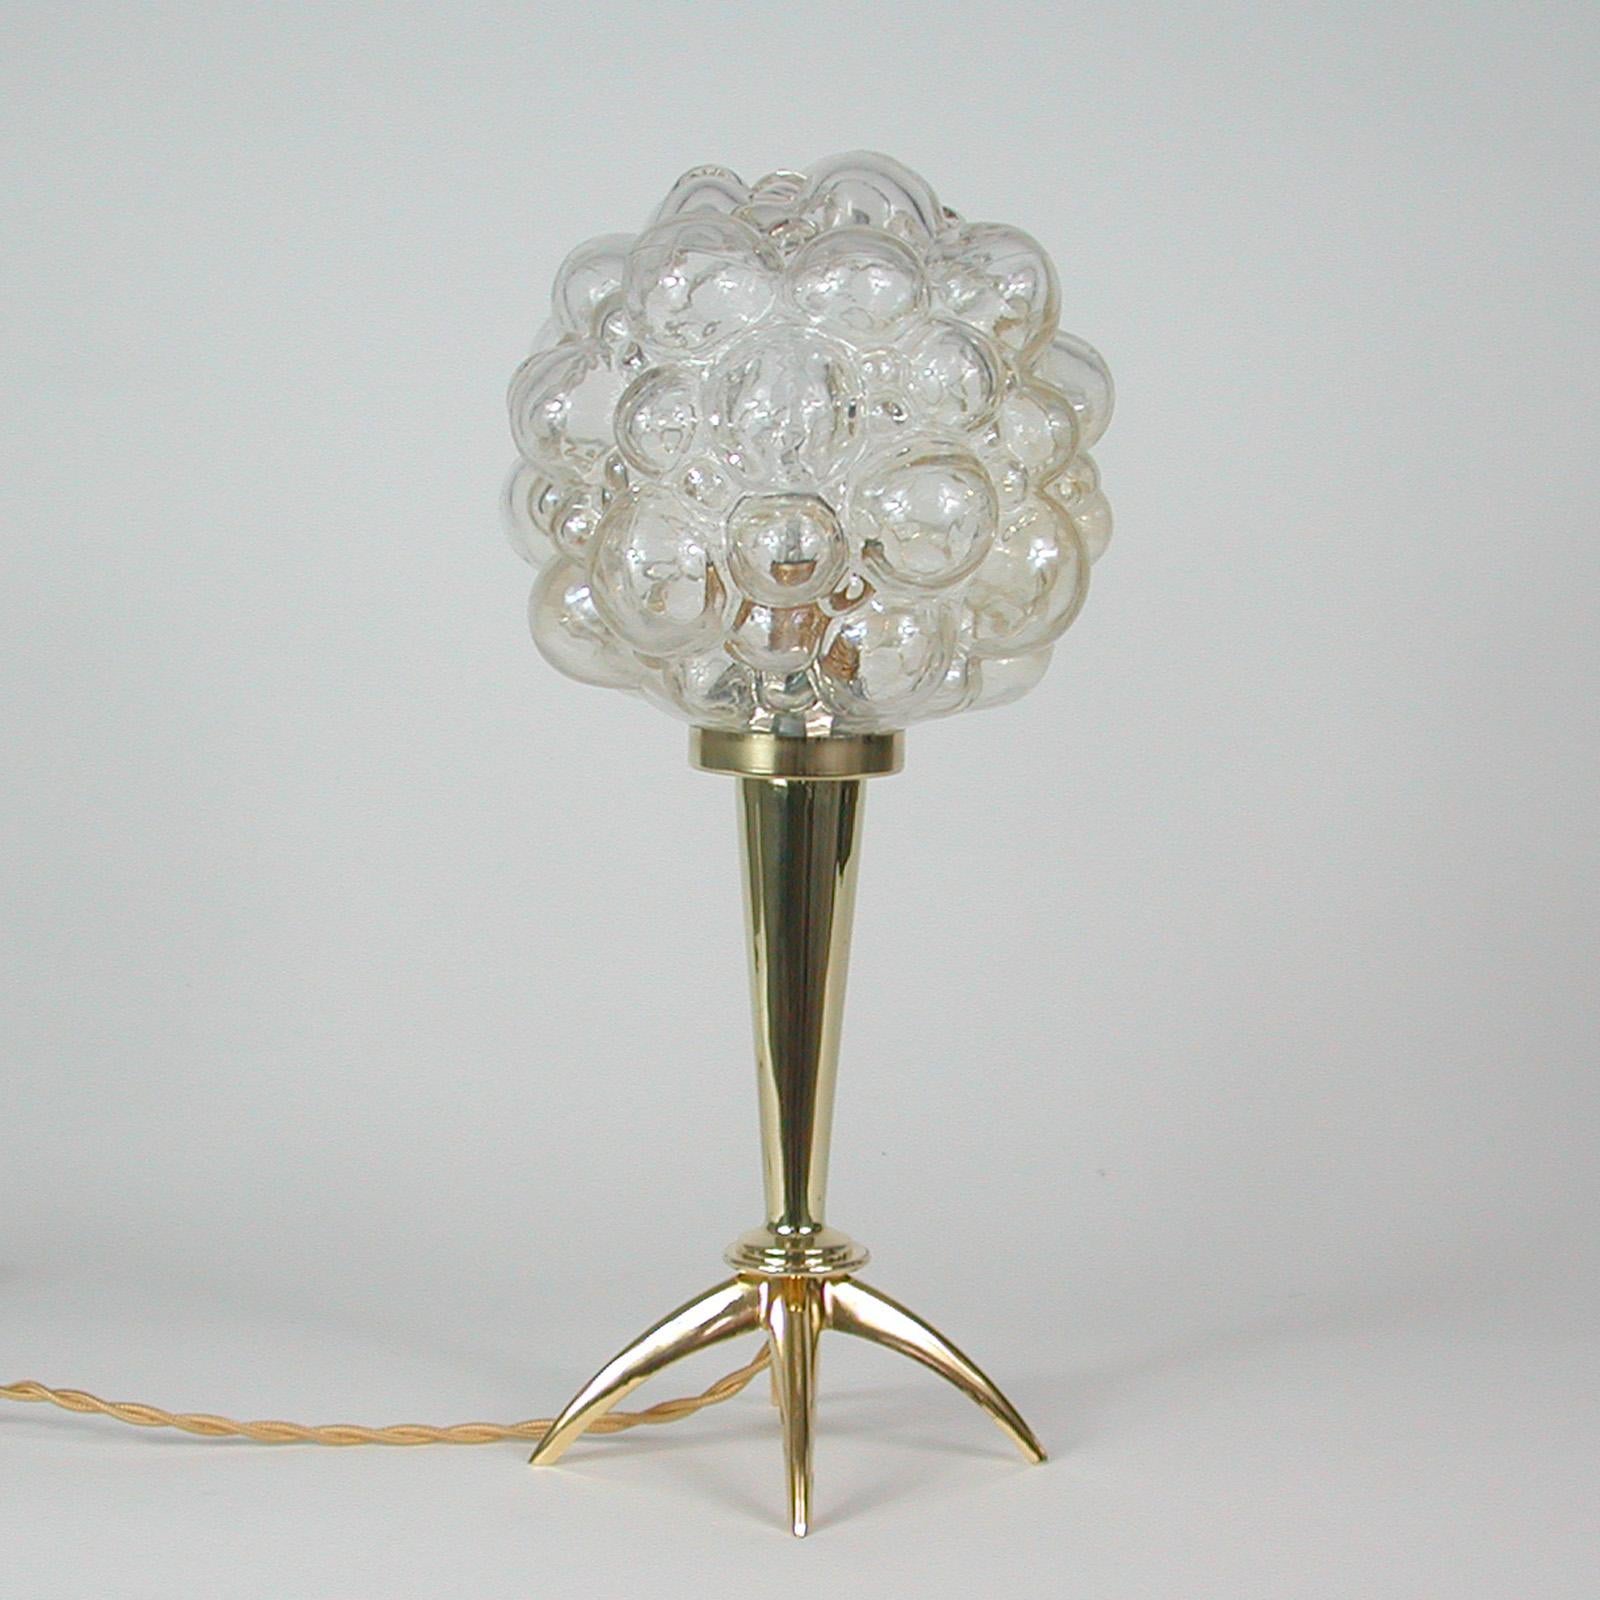 This midcentury table lamp were designed by Helena Tynell and manufactured by Limburg in the 1960s.
It features a brass base and a clear bubble glass lampshade.

The light has been re-electrified and rewired with new silk cord for use in US. It